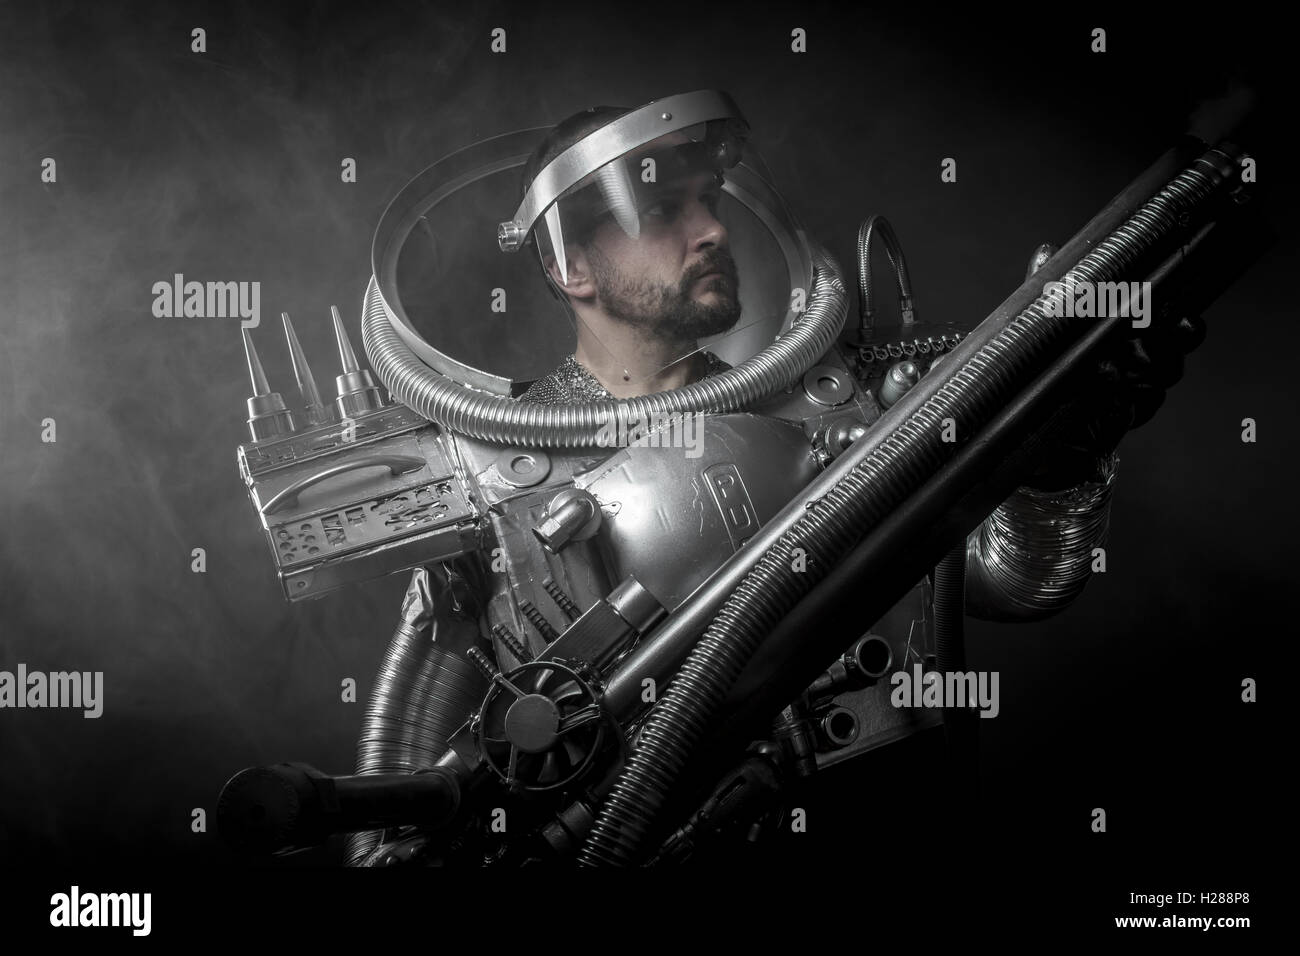 Cosmonaut, Astronaut on a black background with huge weapon. Stock Photo